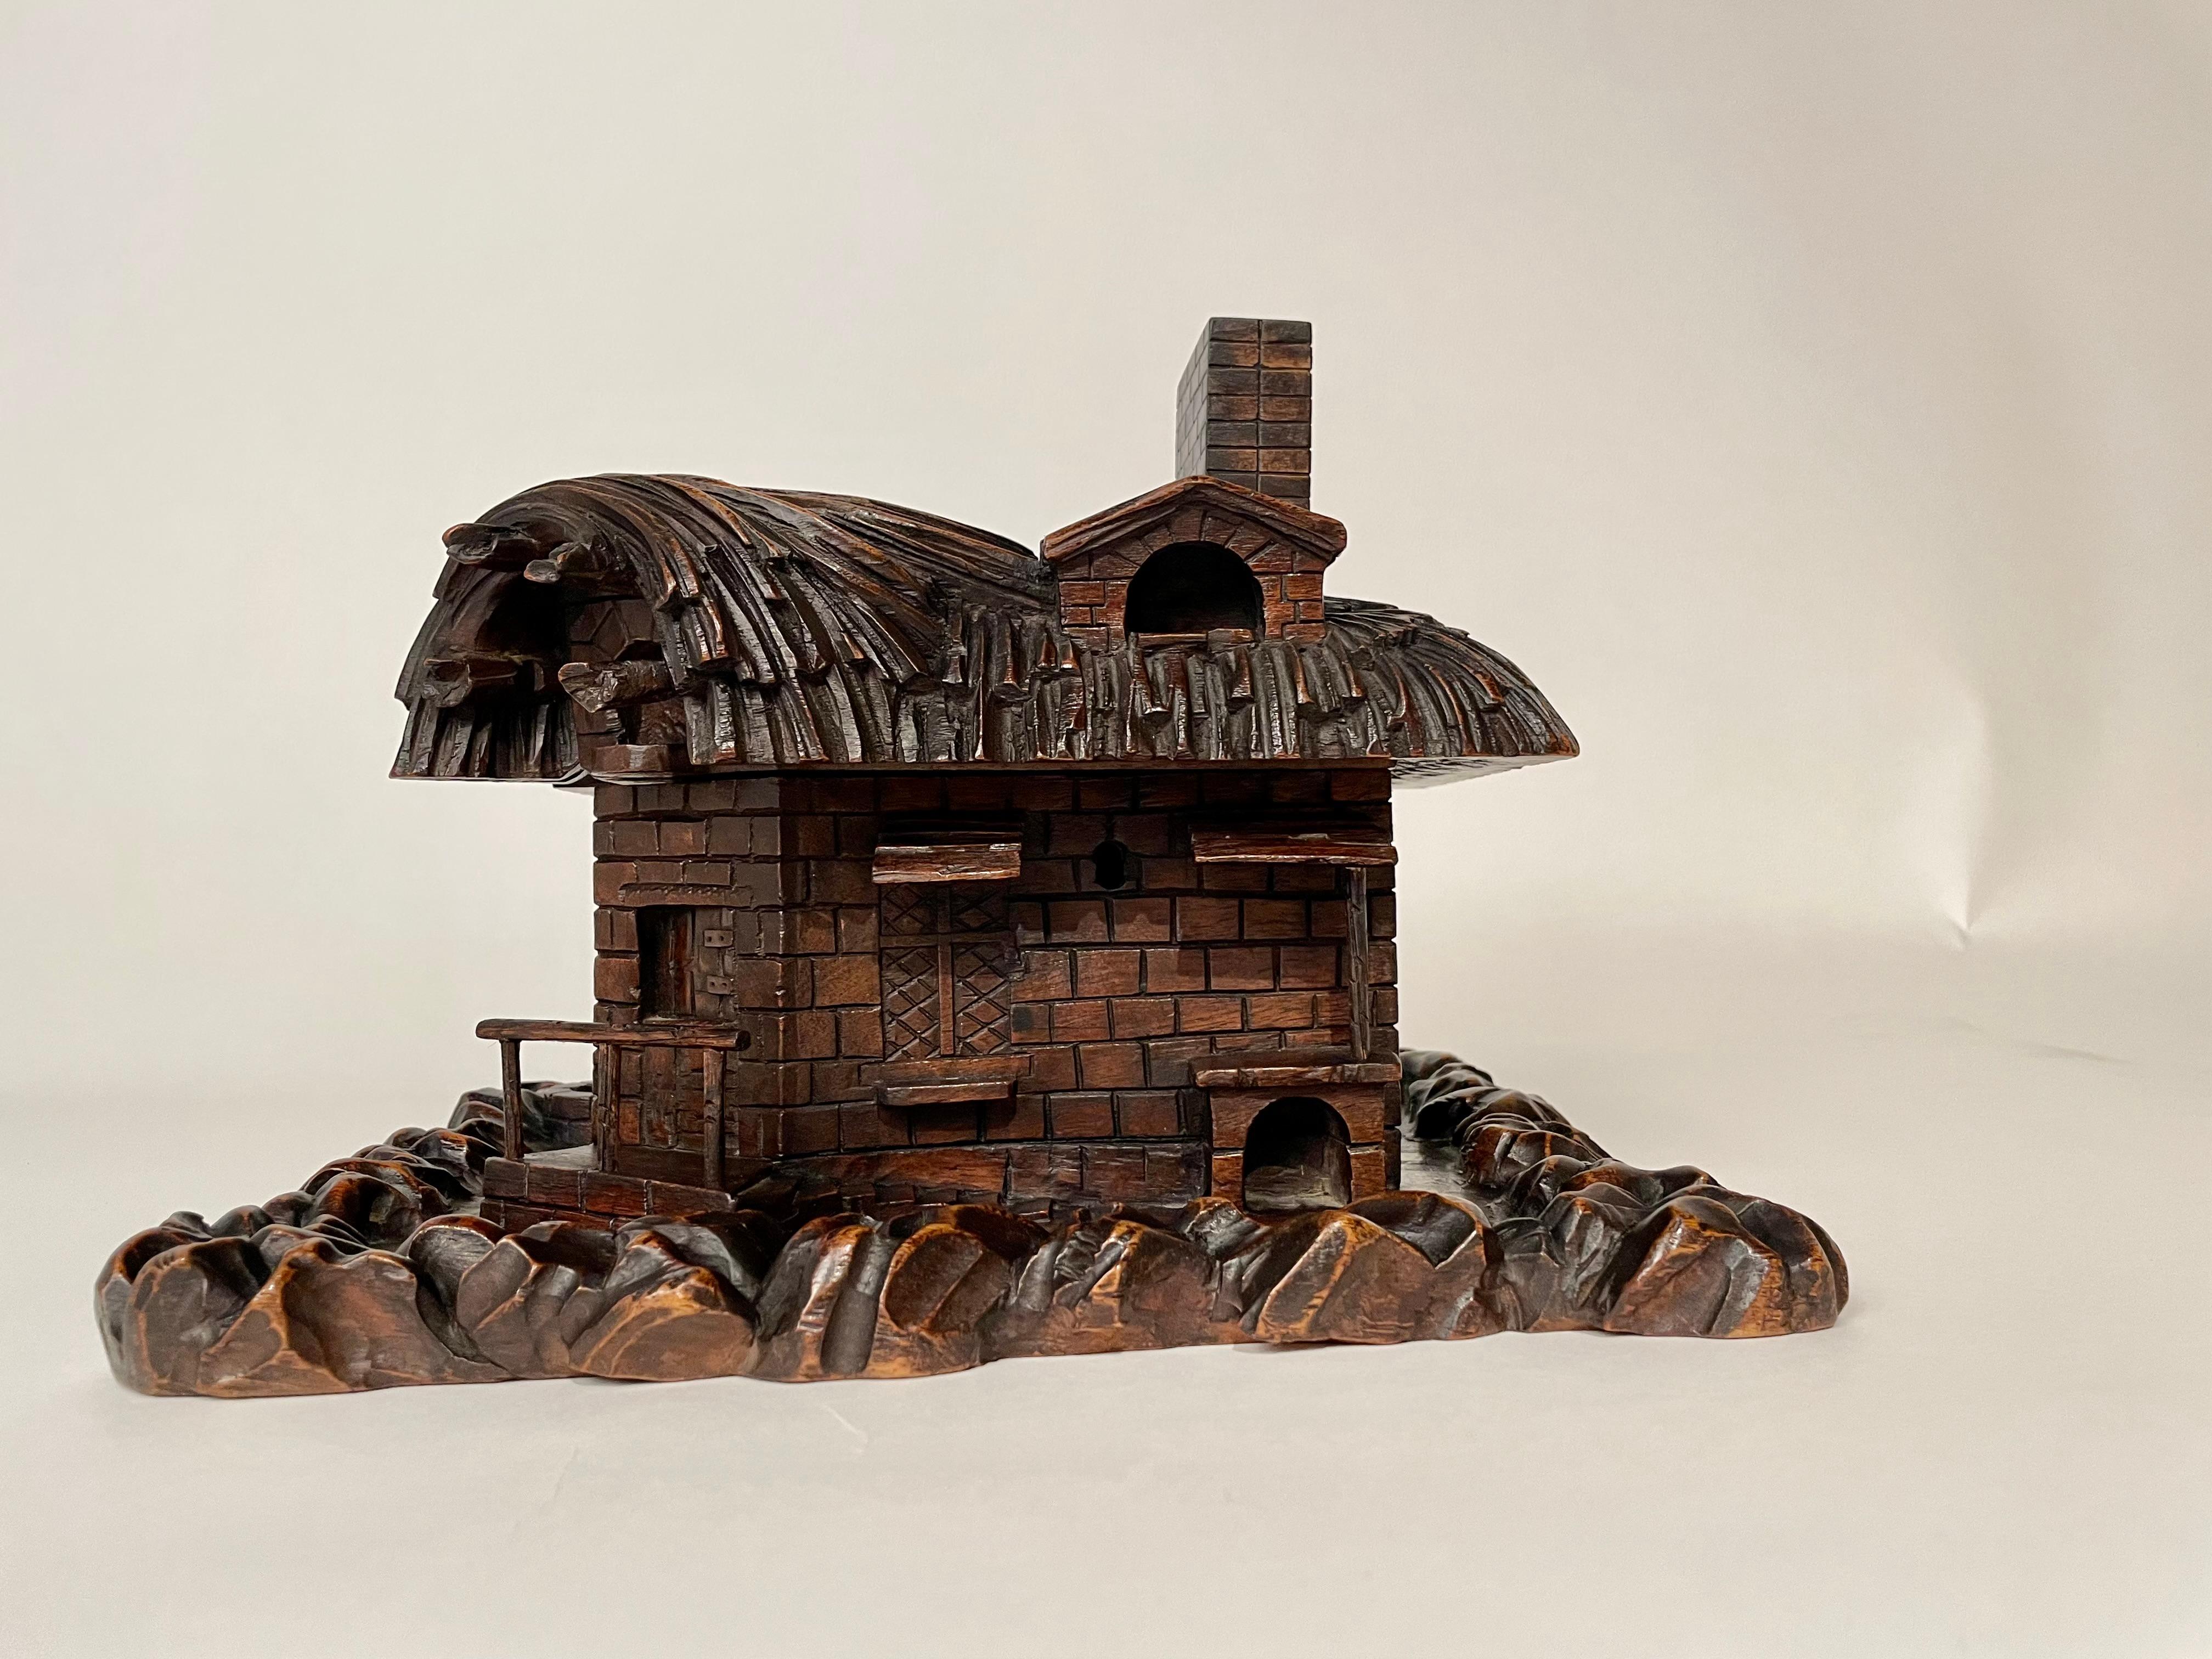 Fantastic and rare example of Black Forest folk art, a tour de force of carving by a master woodworker. This lift top box in the form of a thatched cottage has many wonderful details. The various surfaces of the walls, the amazing thatched roof, the